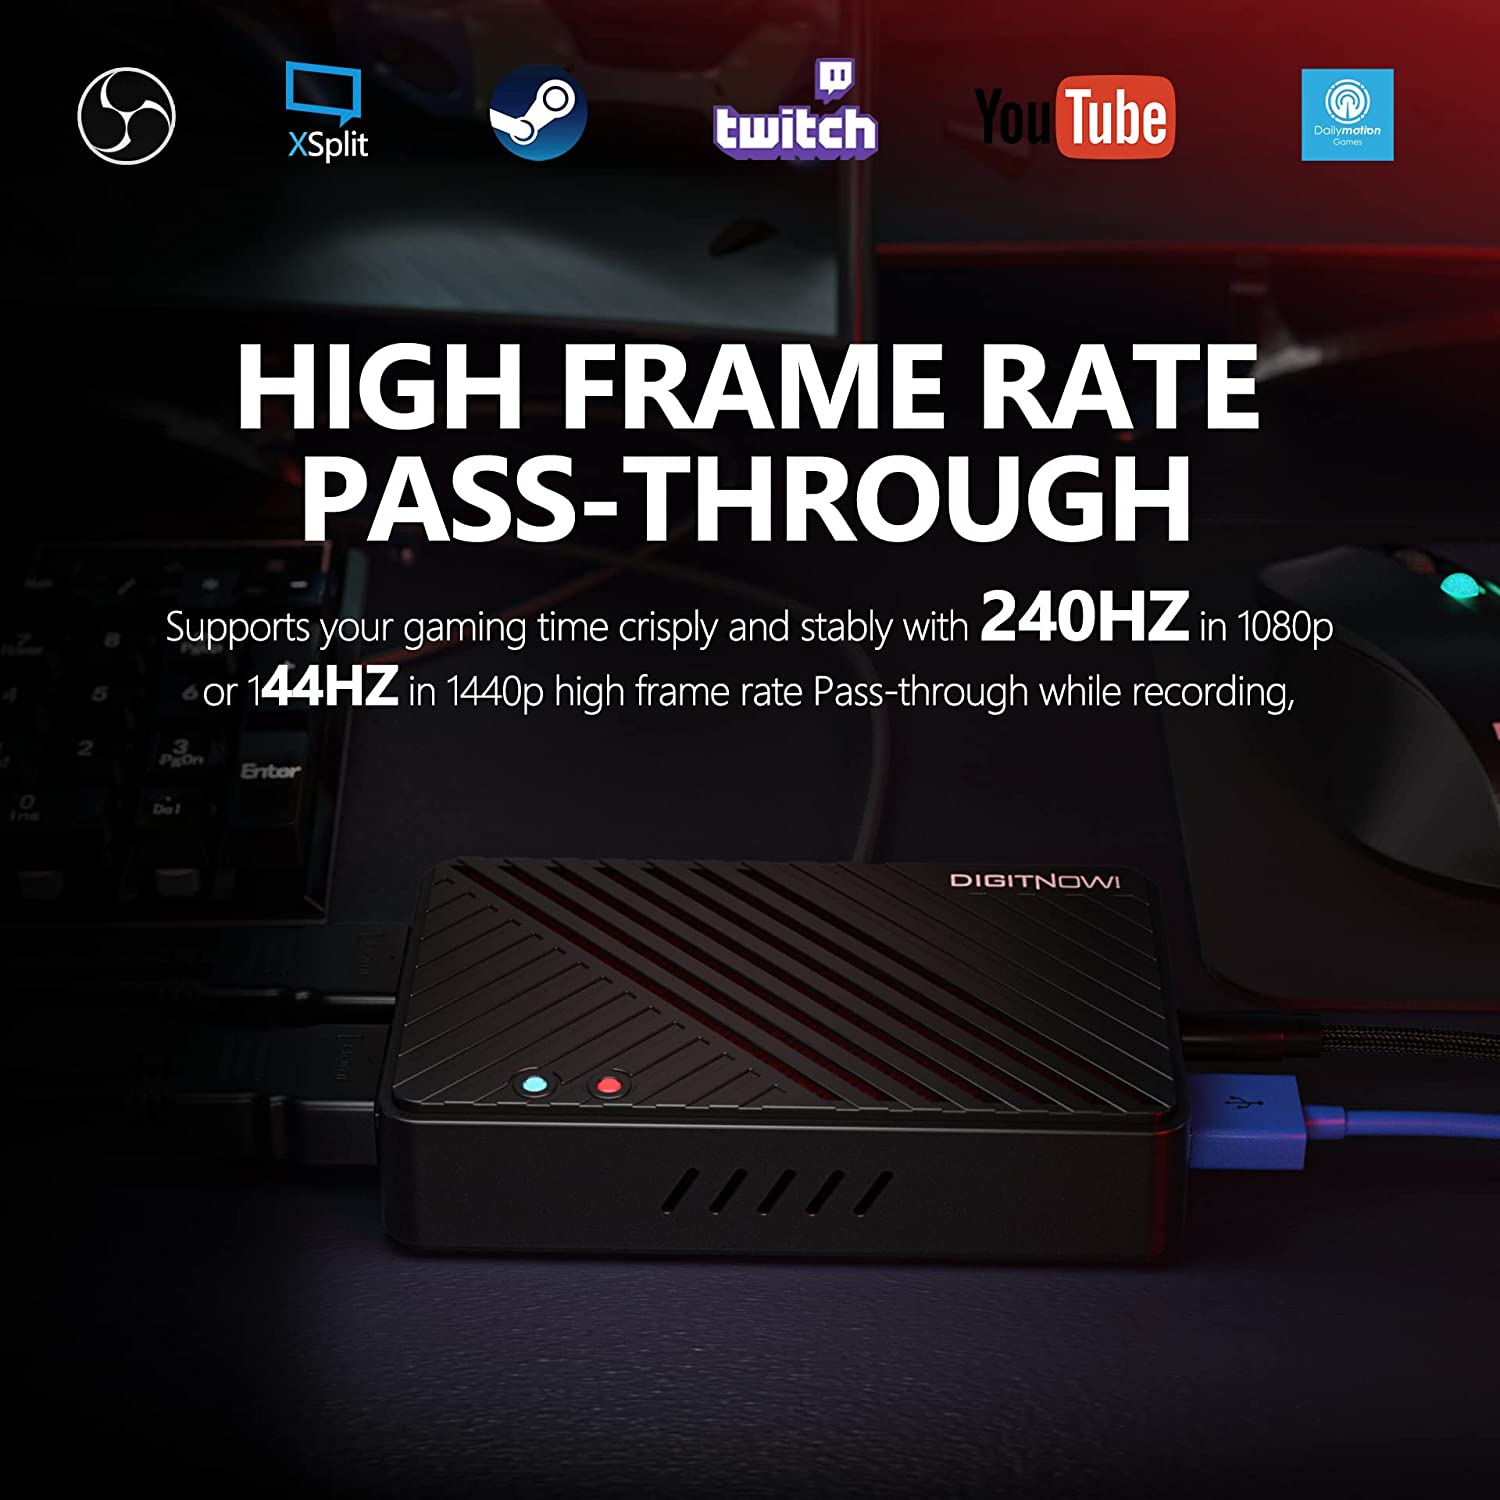 Live Gamer Ultra 4Kp60 HDMI Video Capture Card ,Ultra-Low Latency for Broadcasting Streaming Recording Gaming